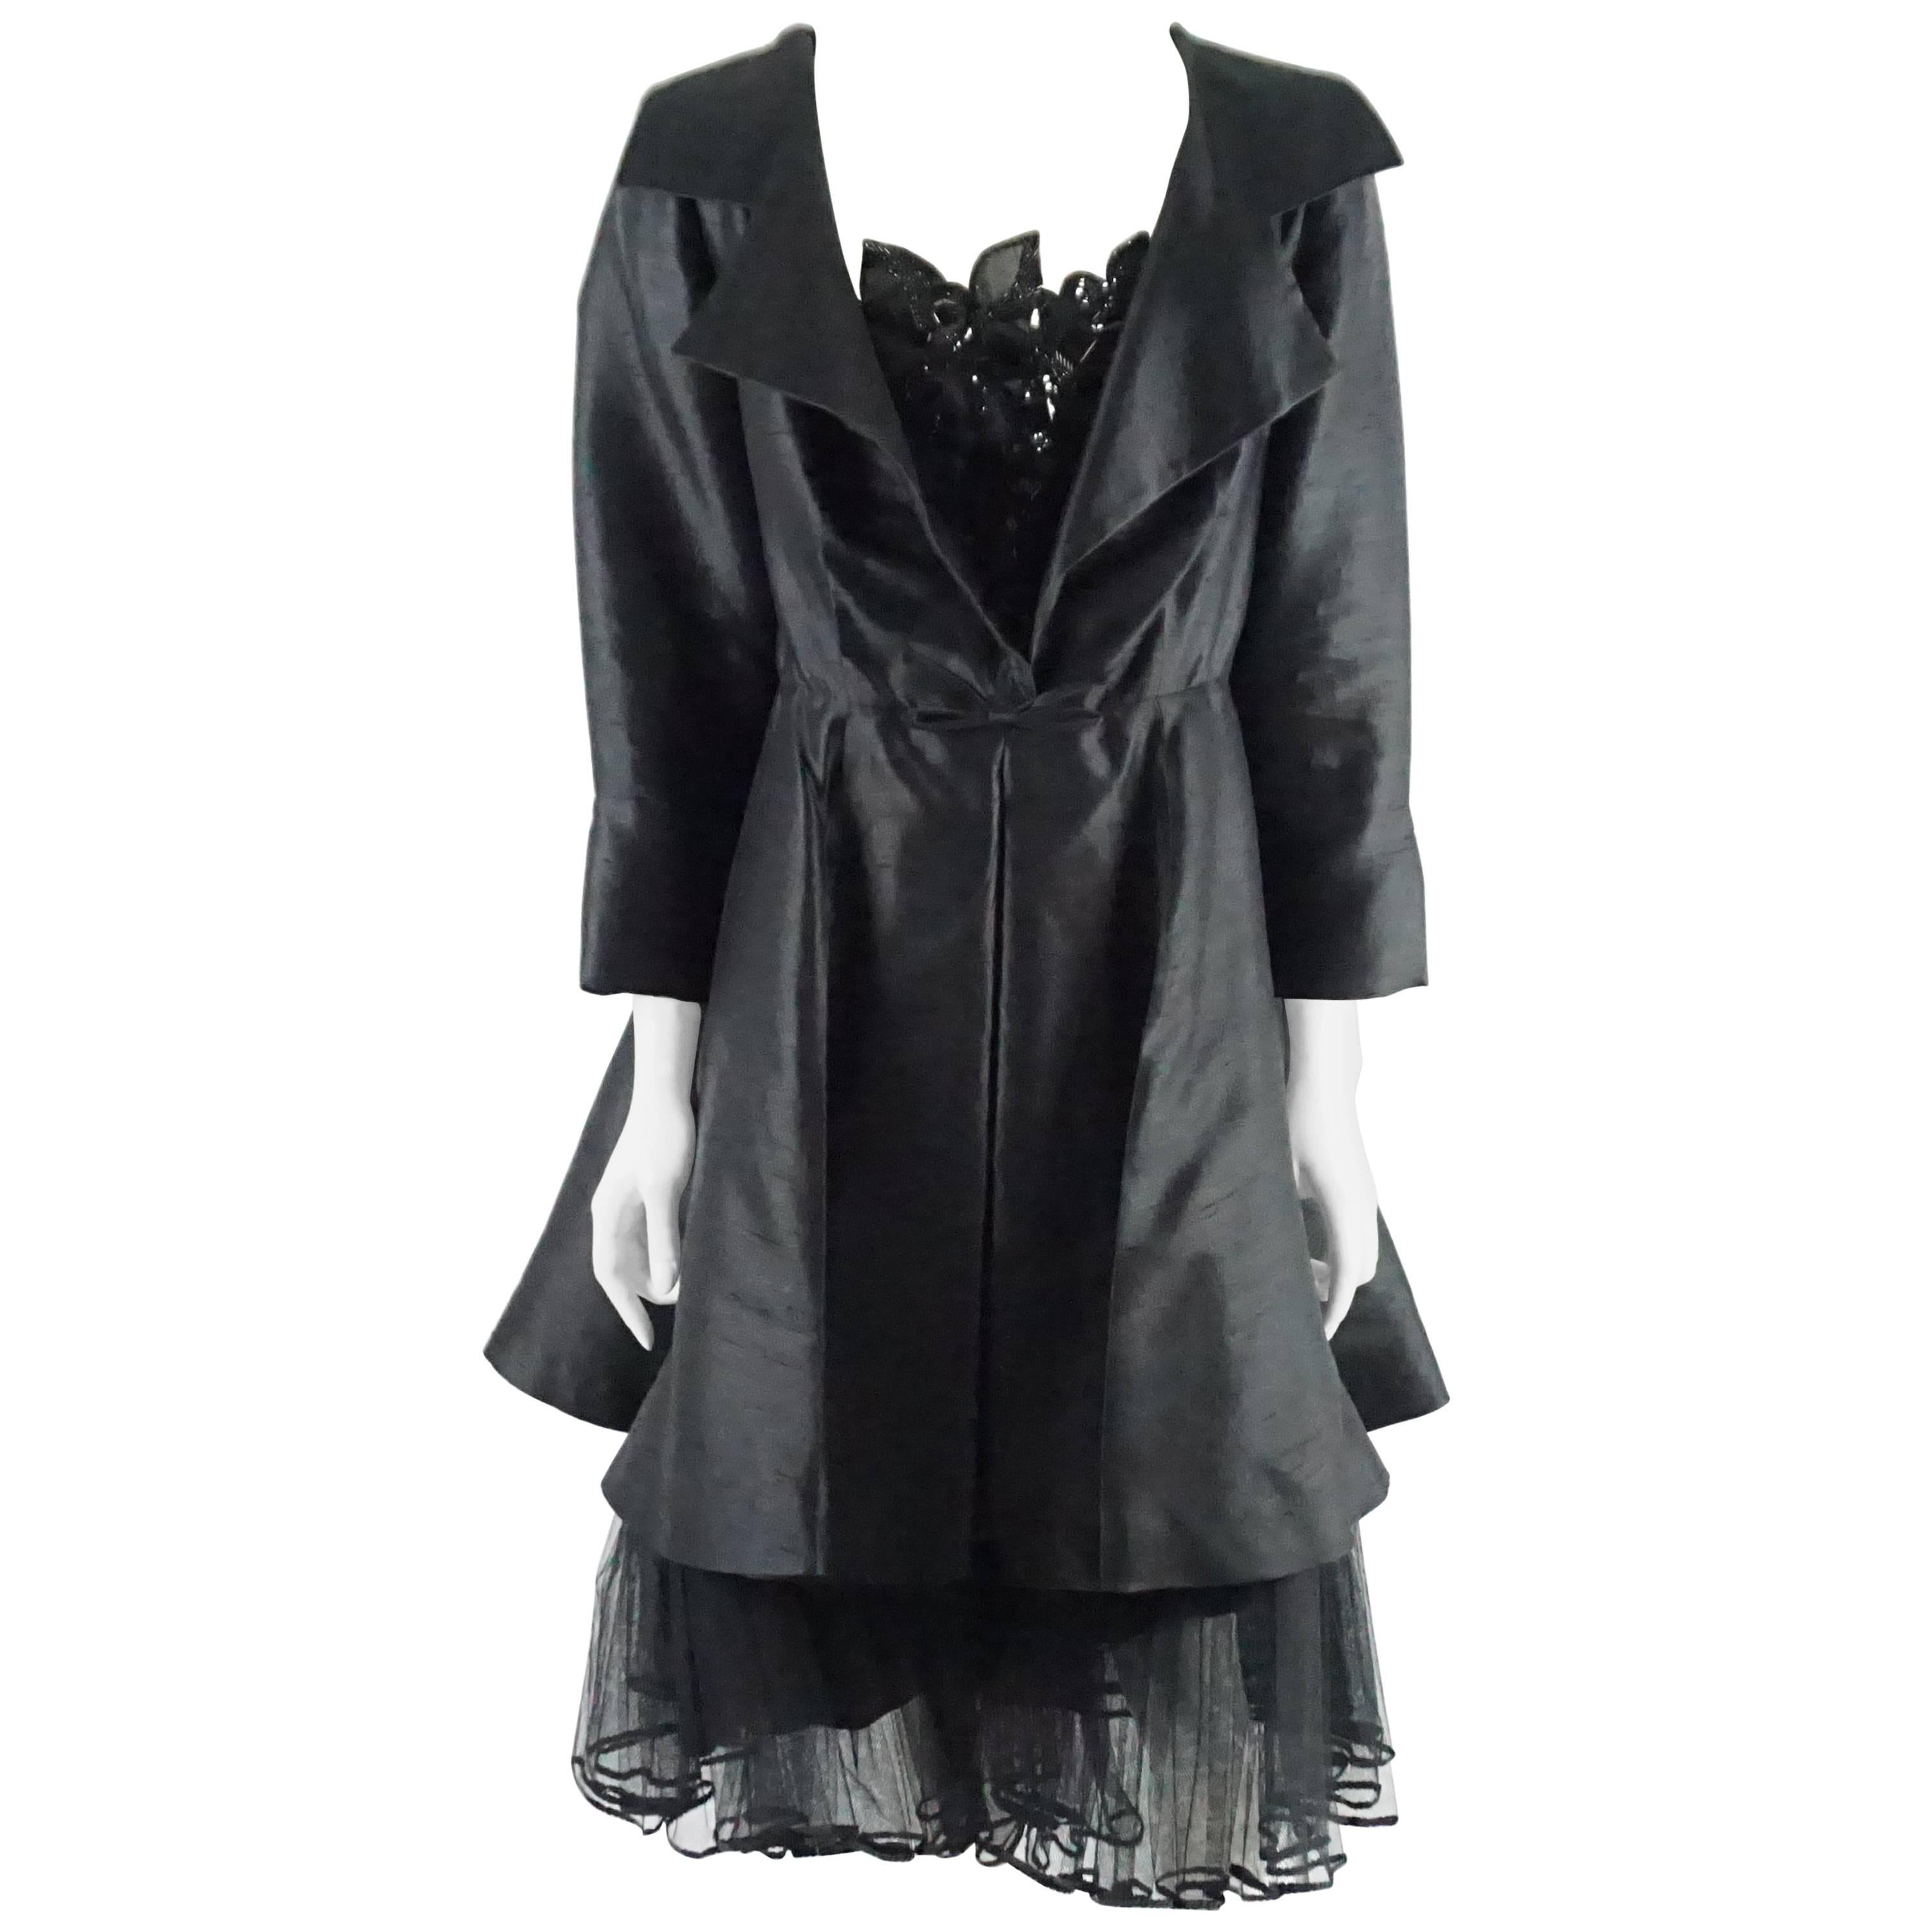 Christian Dior Vintage Black Silk Coat-Dress with Beading and Petticoat - L